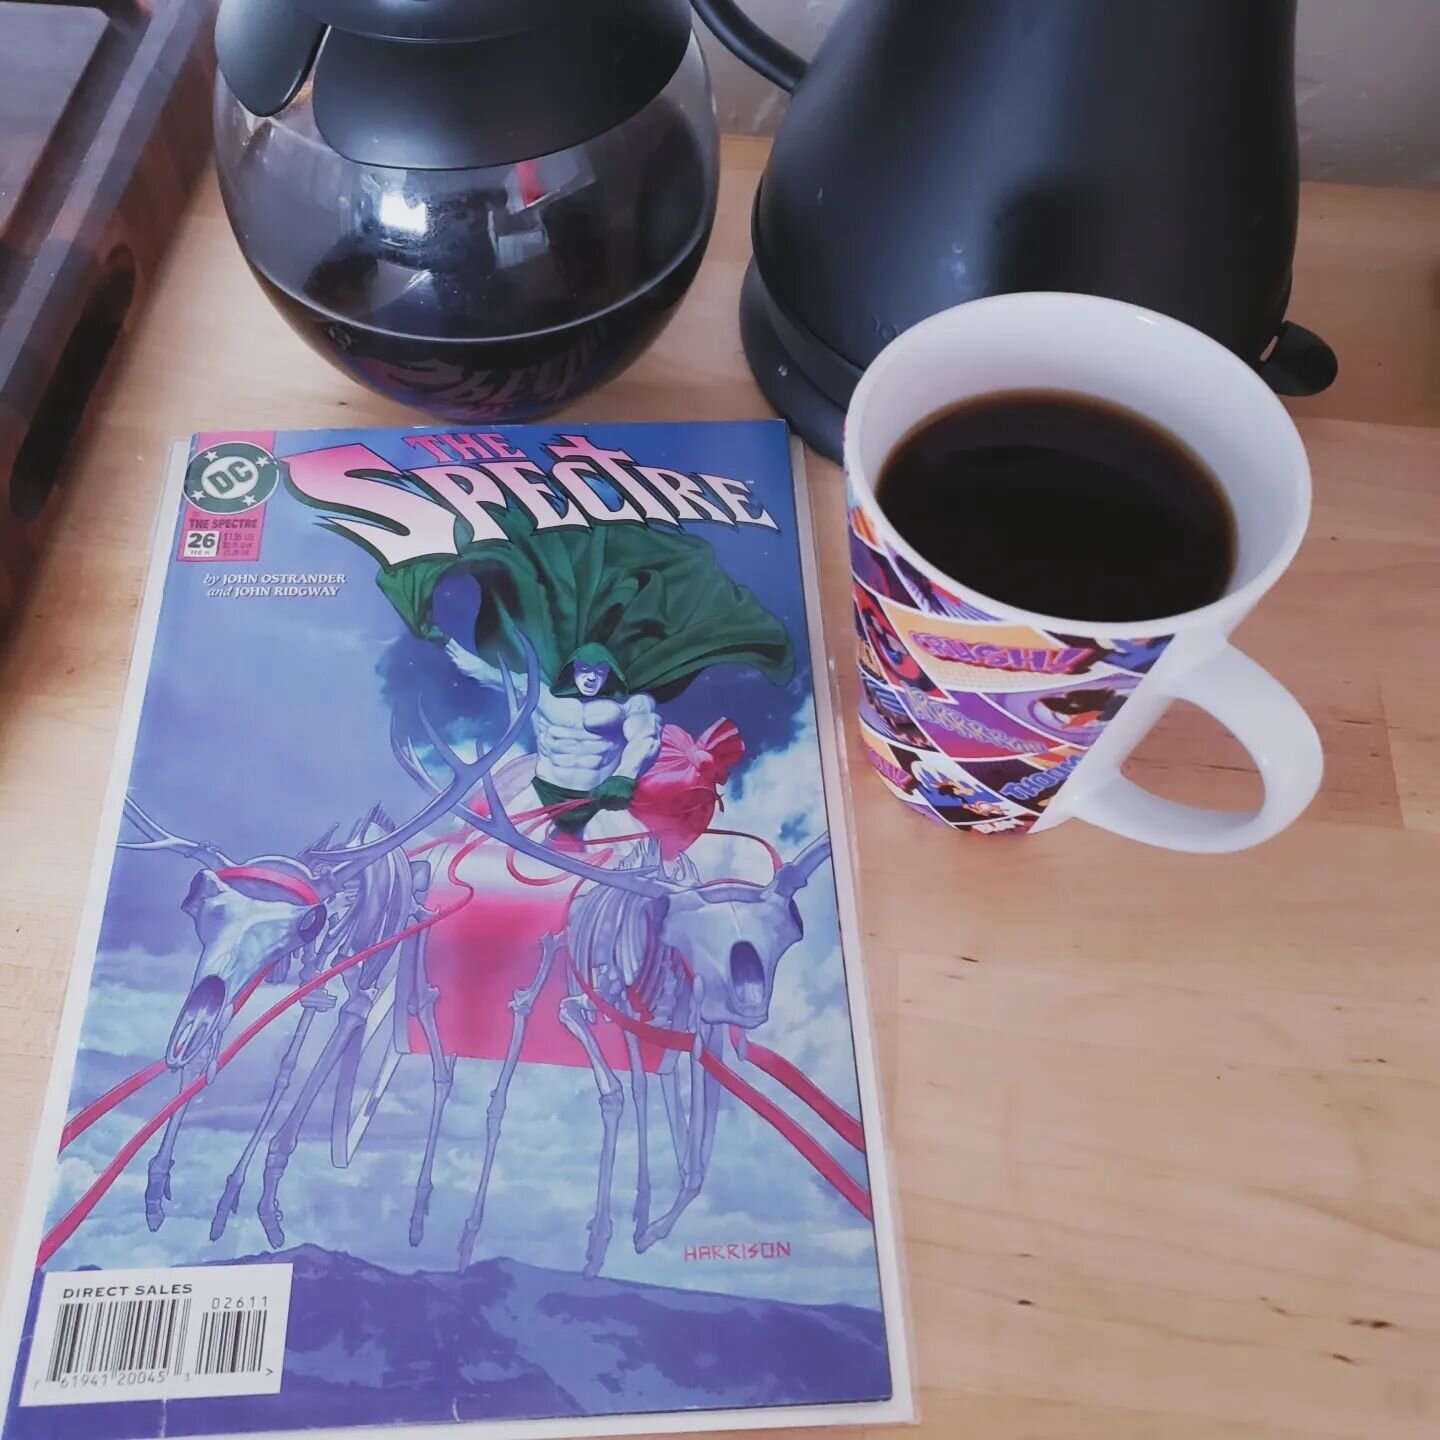 Today's coffee ☕ and a comic 📖 is Spectre #26  from 1992 3rd season 🦸&zwj;♂️🎨

Dive into the chilling world of the Spectre as the Yuletide season approaches

Written by John Ostrander and illustrated by John Ridgway, this issue follows the Spectre